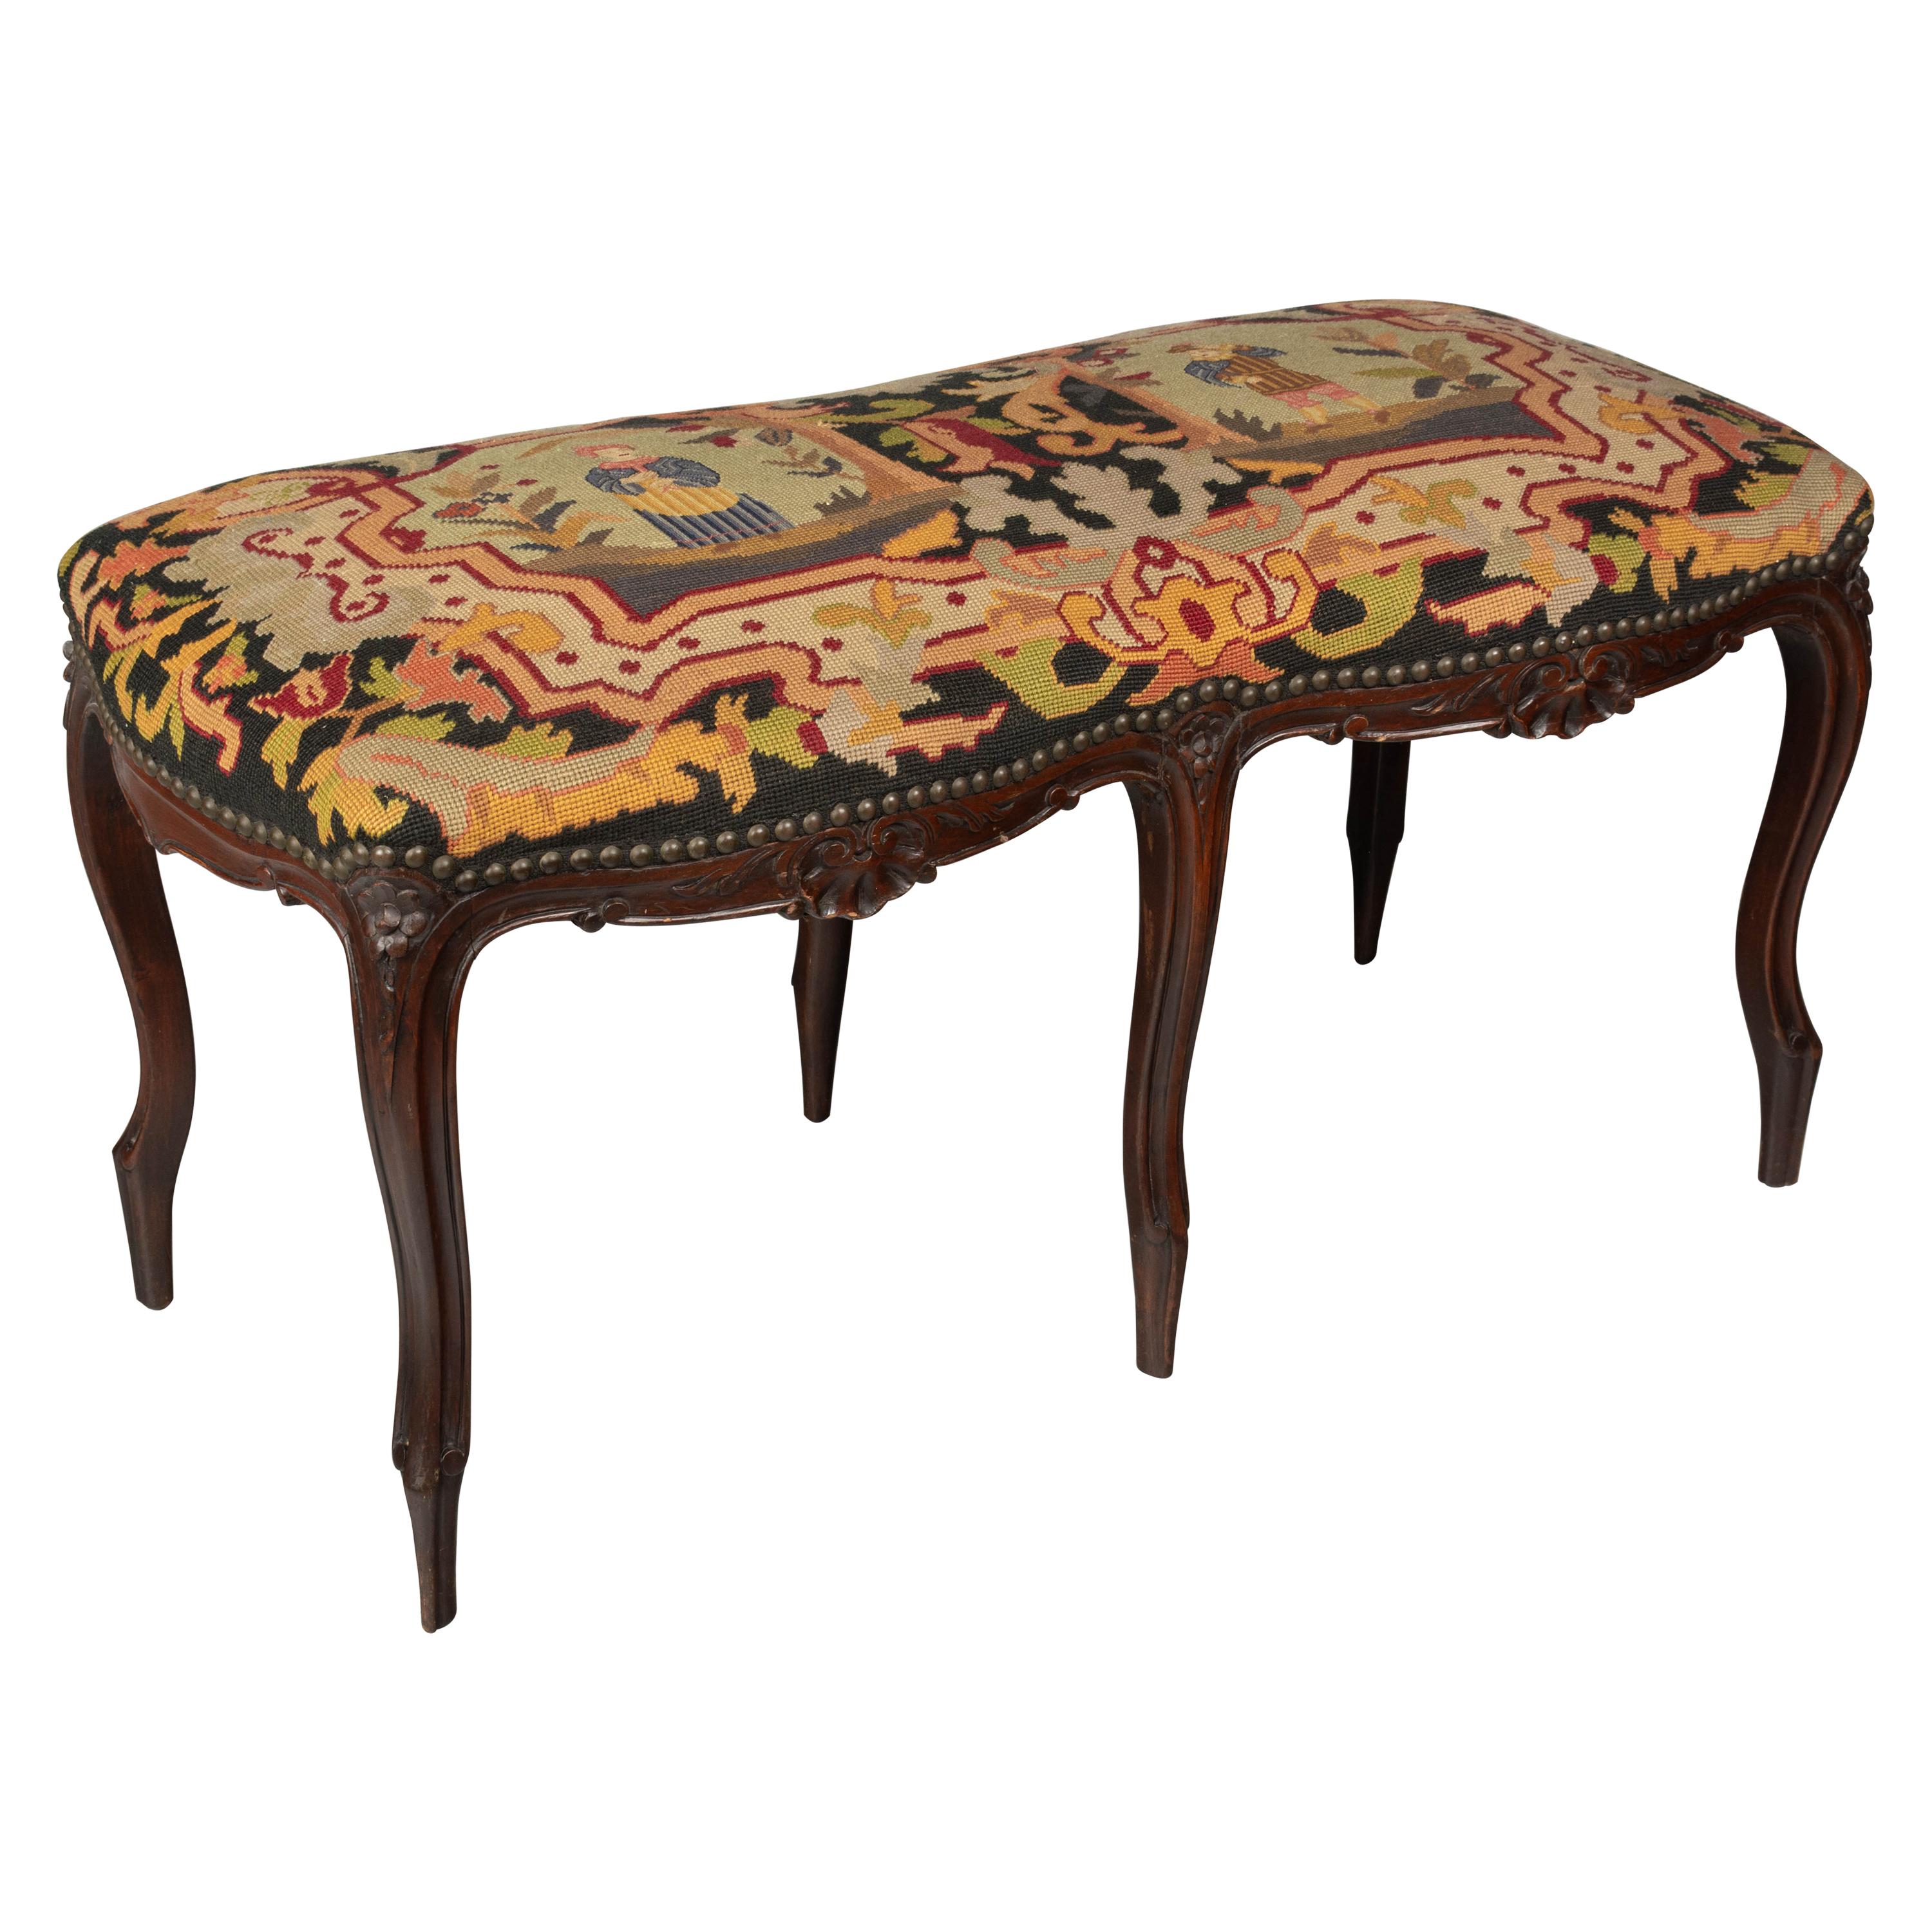 French Louis XV Style Foot Stool or Bench